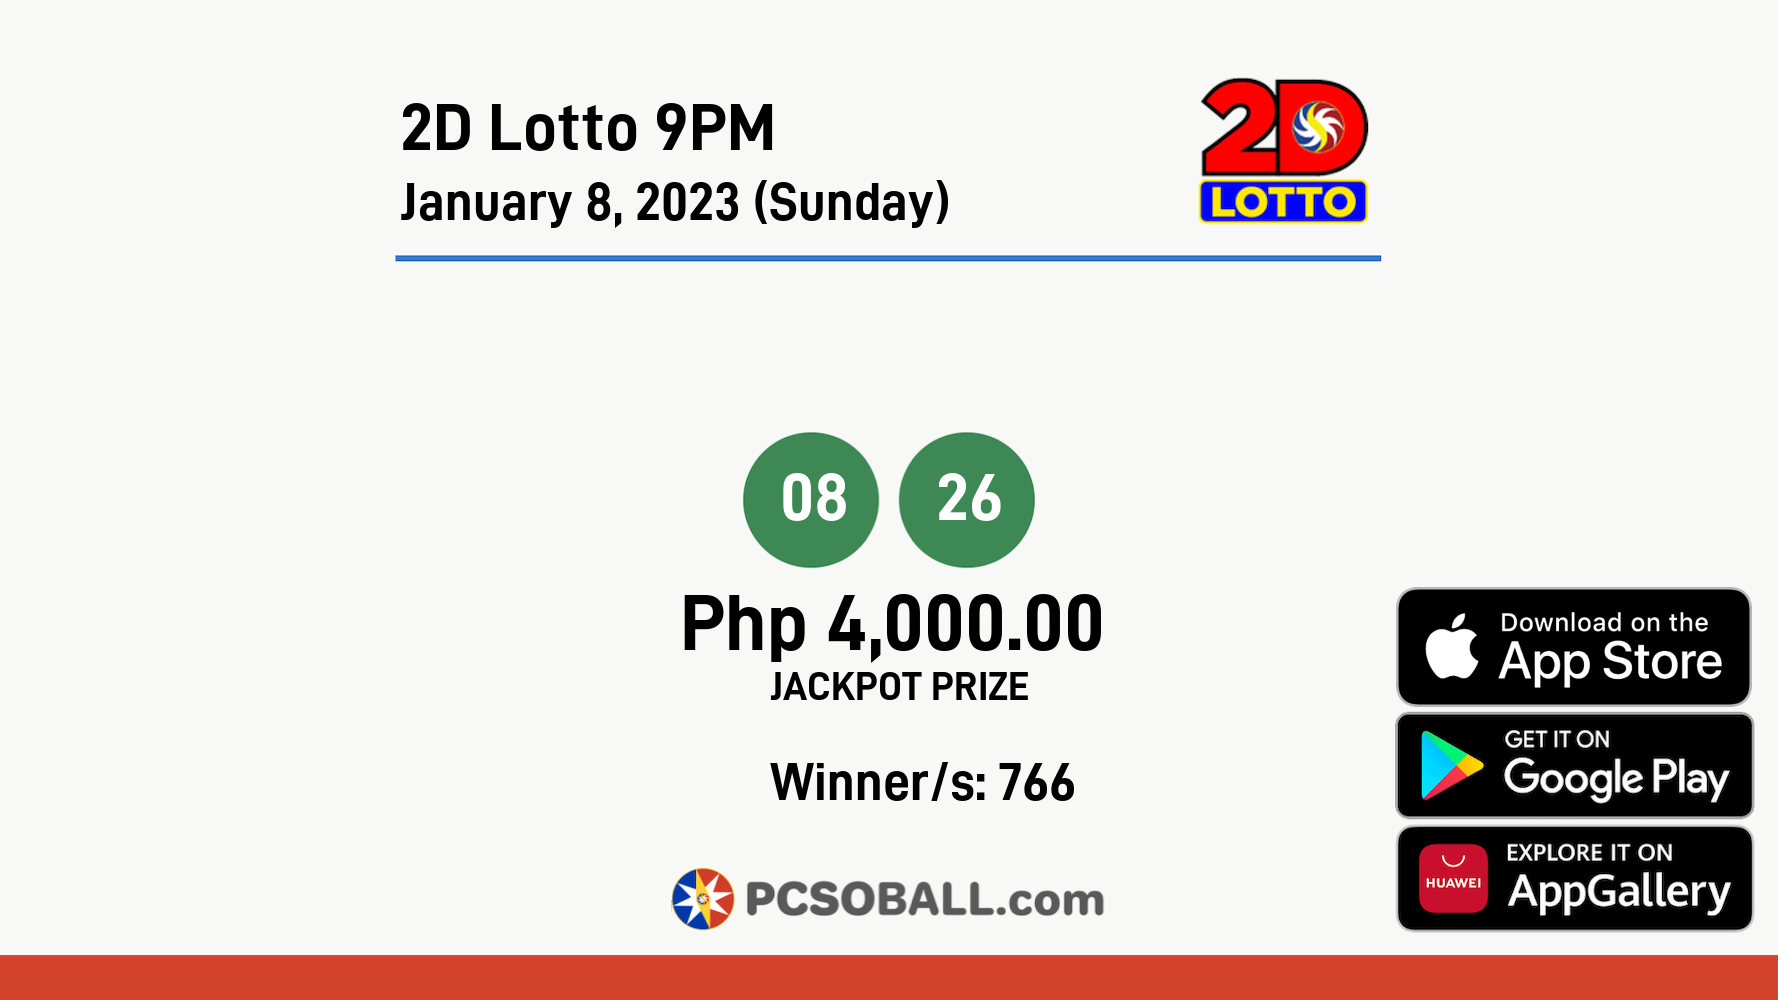 2D Lotto 9PM January 8, 2023 (Sunday) Result